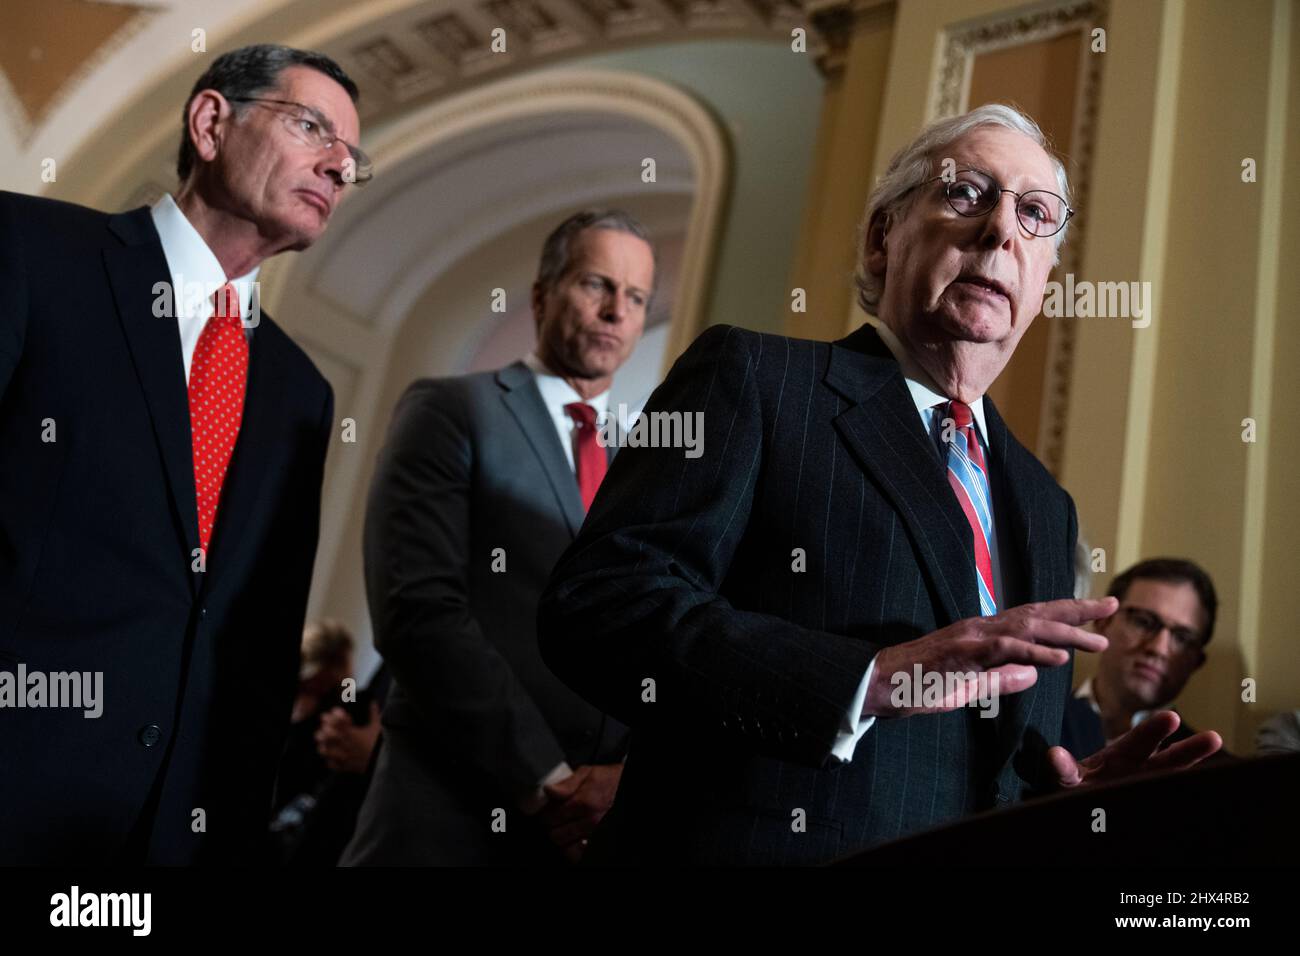 UNITED STATES - MARCH 8: Senate Minority Leader Mitch McConnell, R-Ky., conducts a news conference after the Senate luncheons in the U.S. Capitol on Tuesday, March 8, 2022. Sens. John Barrasso, R-Wyo., left, and John Thune, R-S.D., also appear. (Tom Williams/CQ Roll Call/Sipa USA) Stock Photo